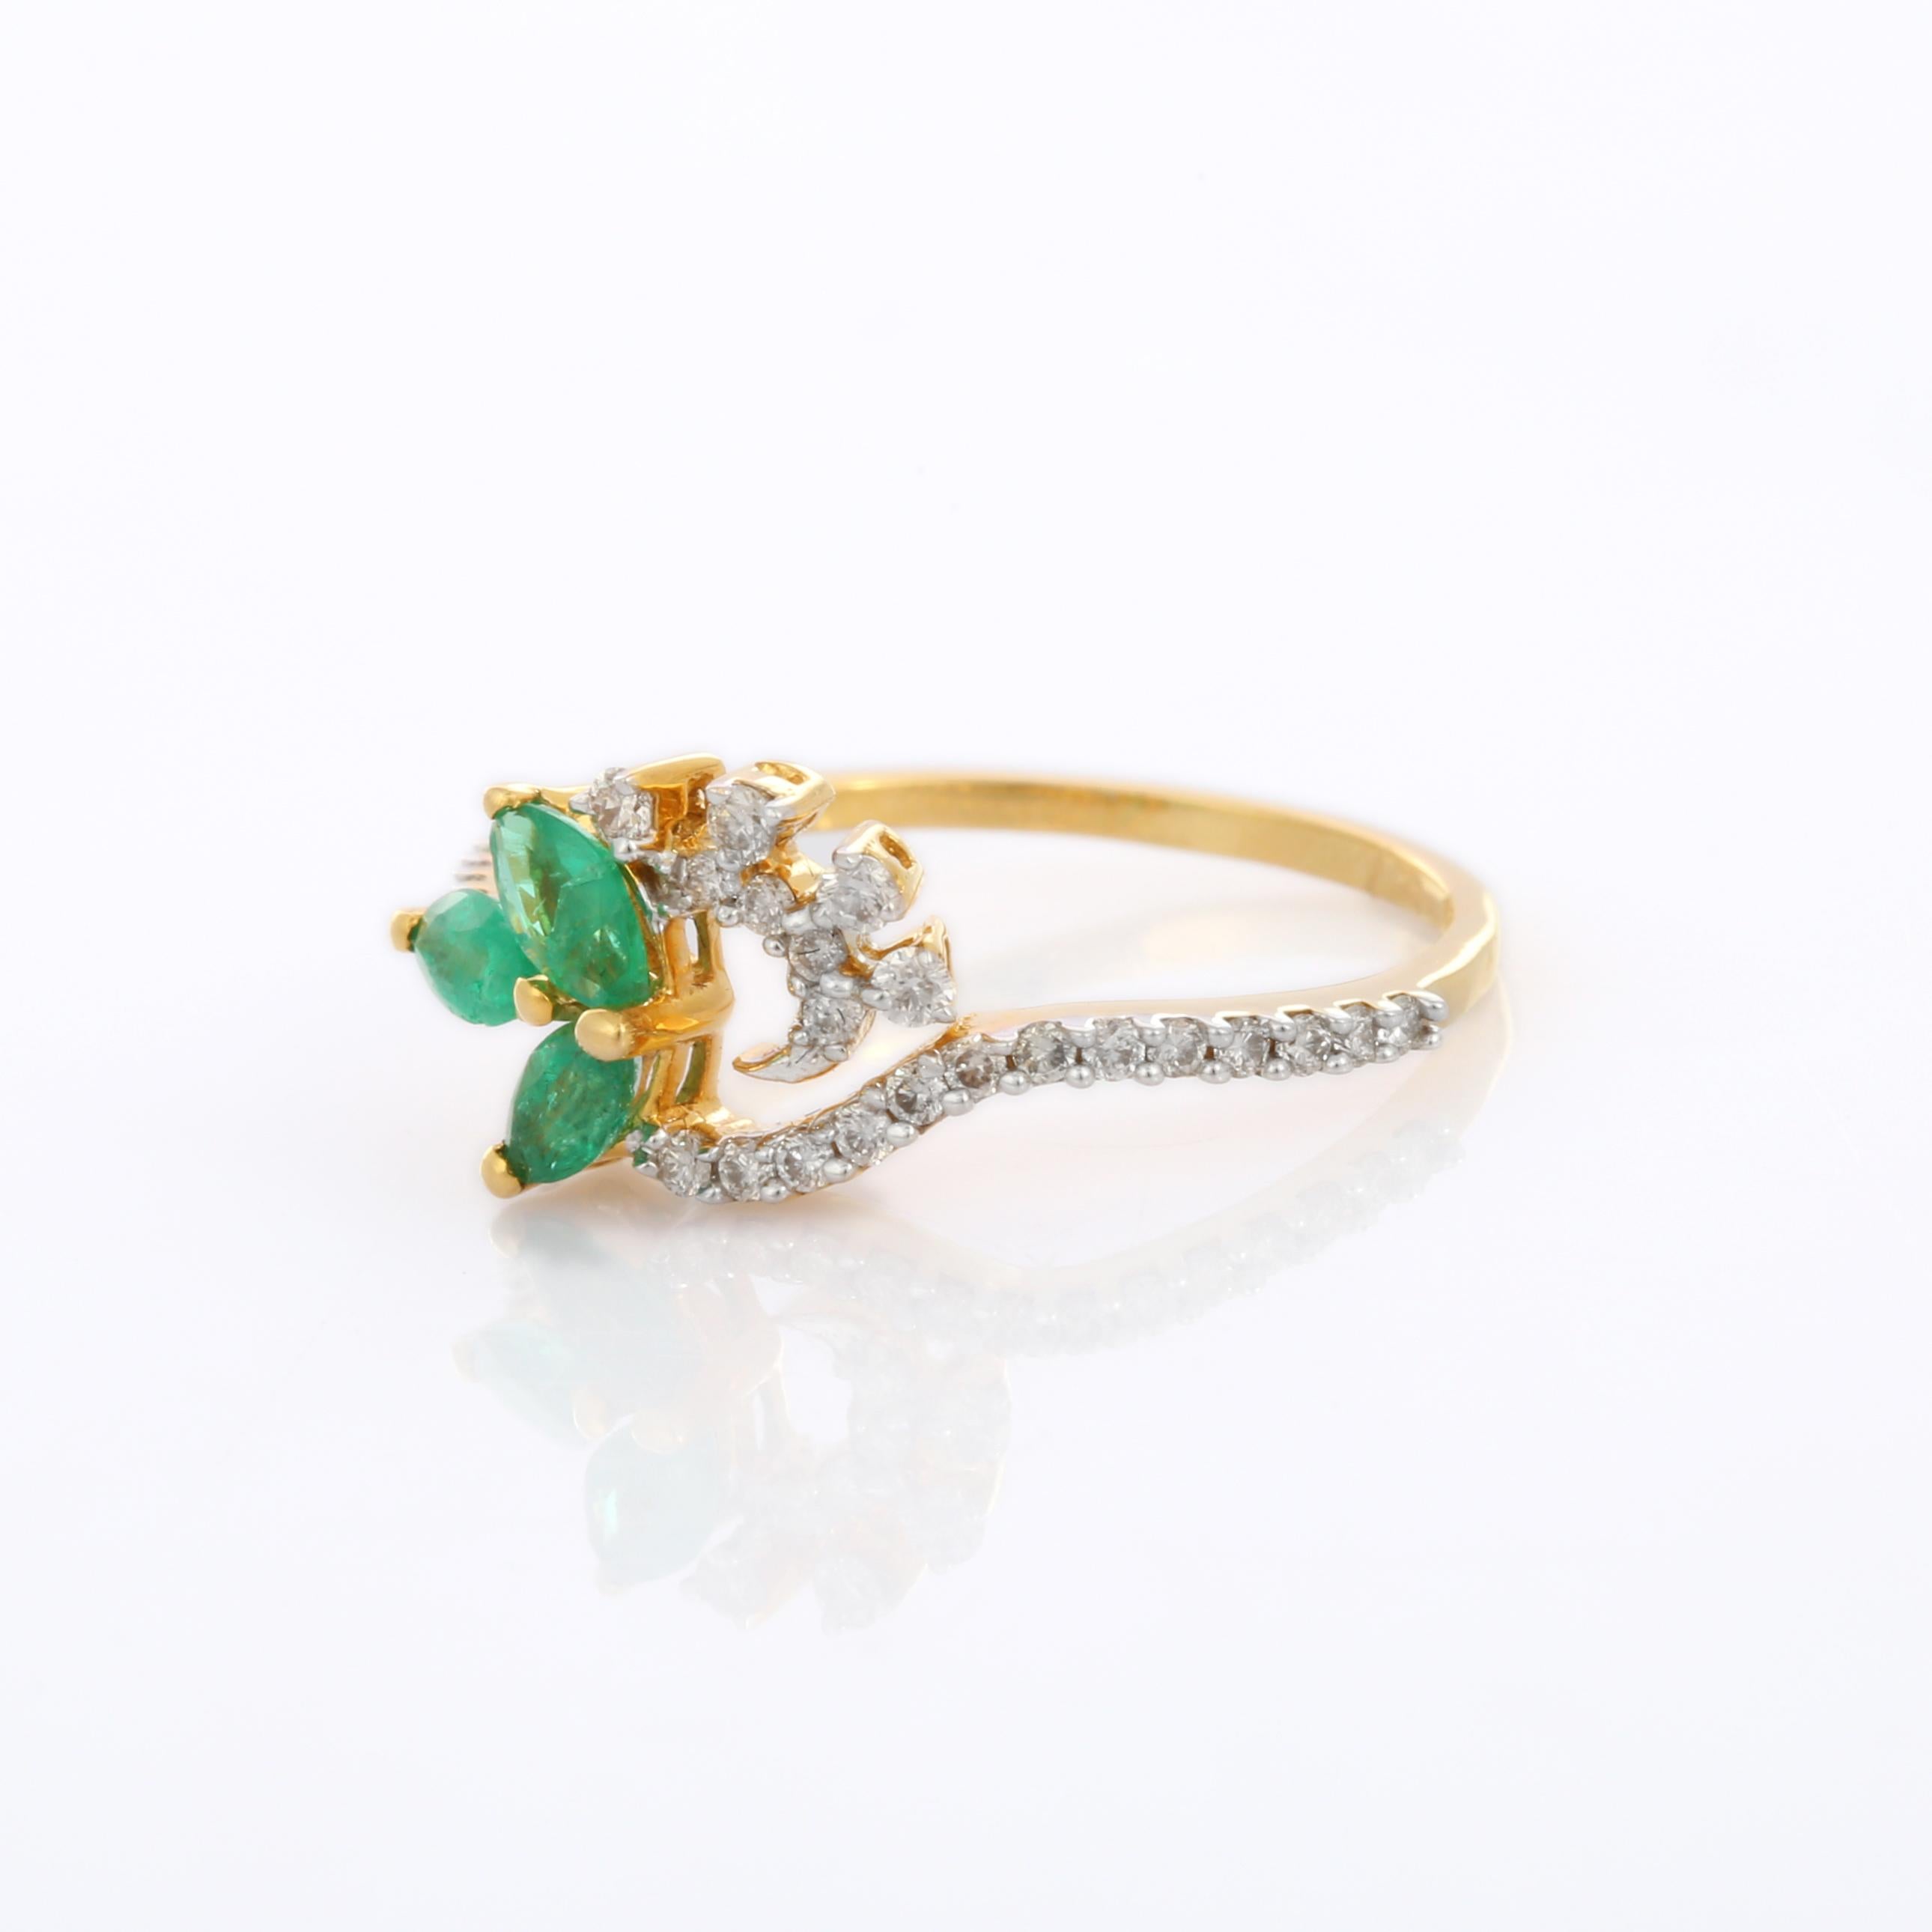 For Sale:  18K Yellow Gold Emerald Diamond Engagement Ring 3